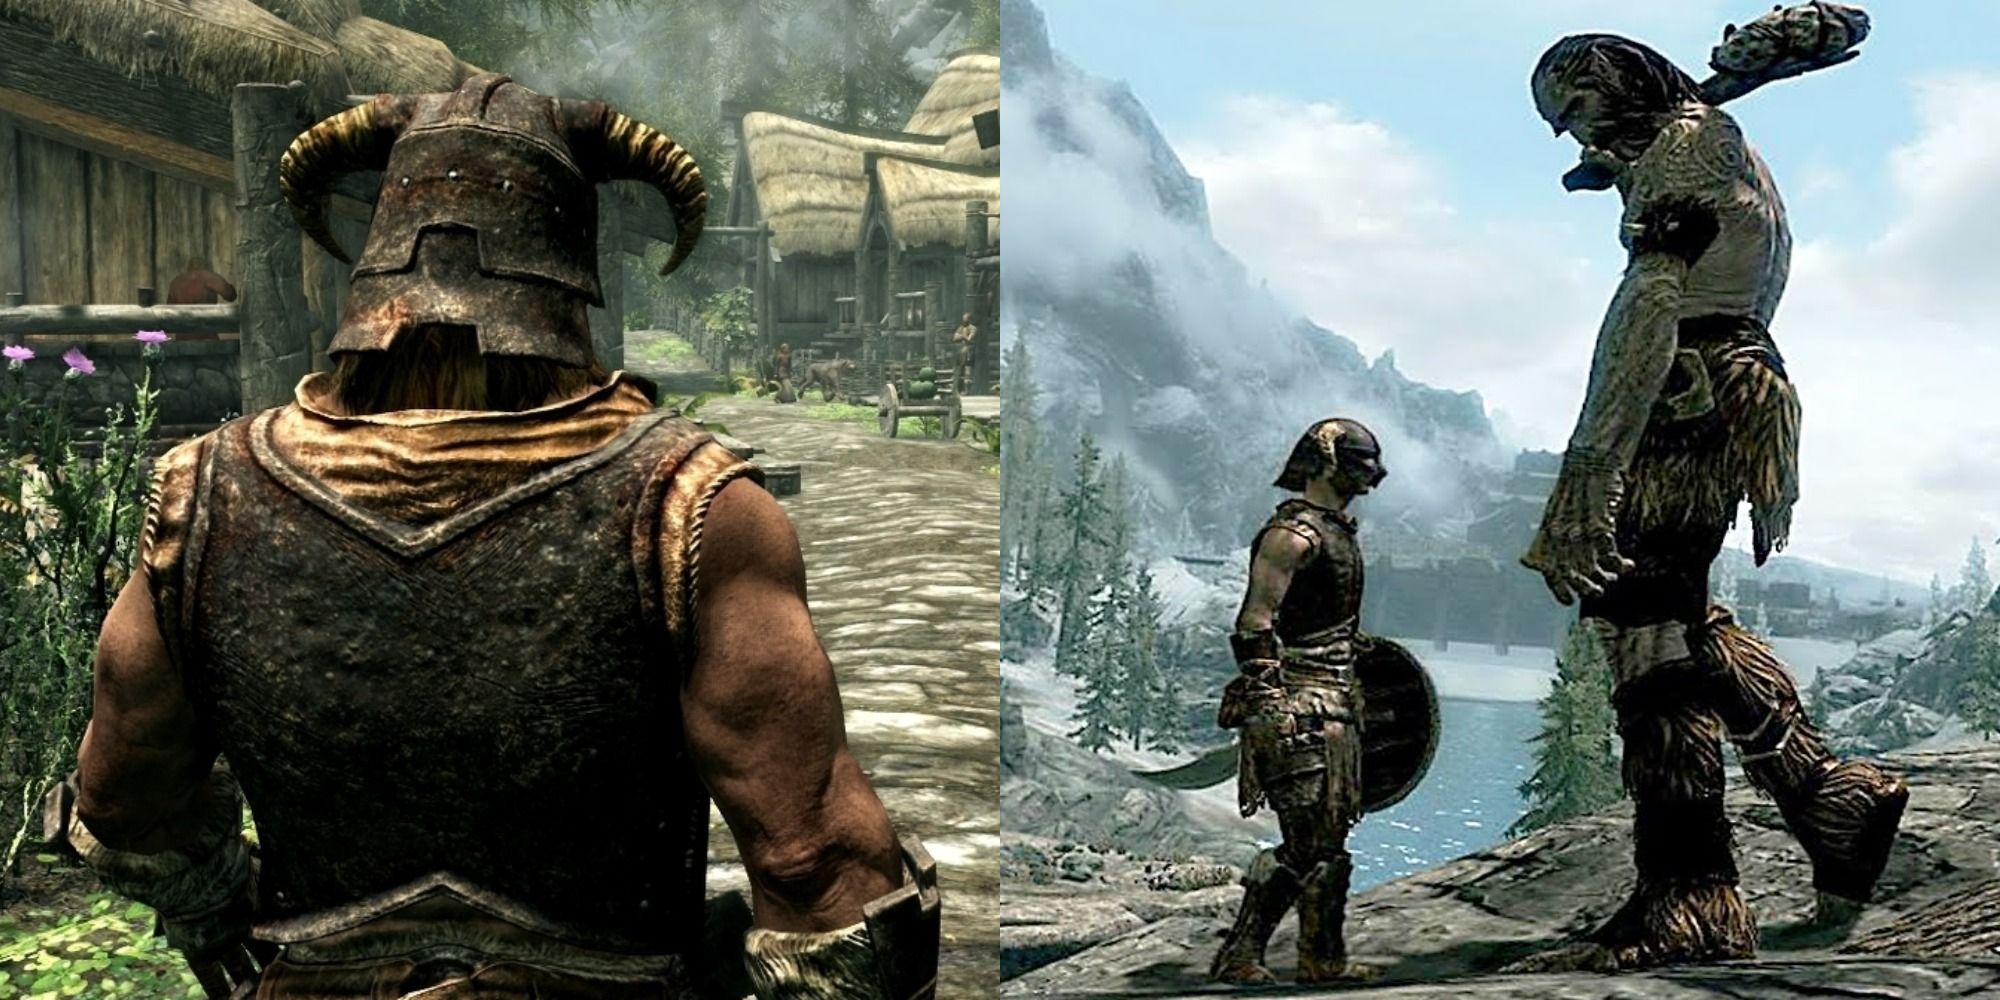 Two side by side images from Skyrim